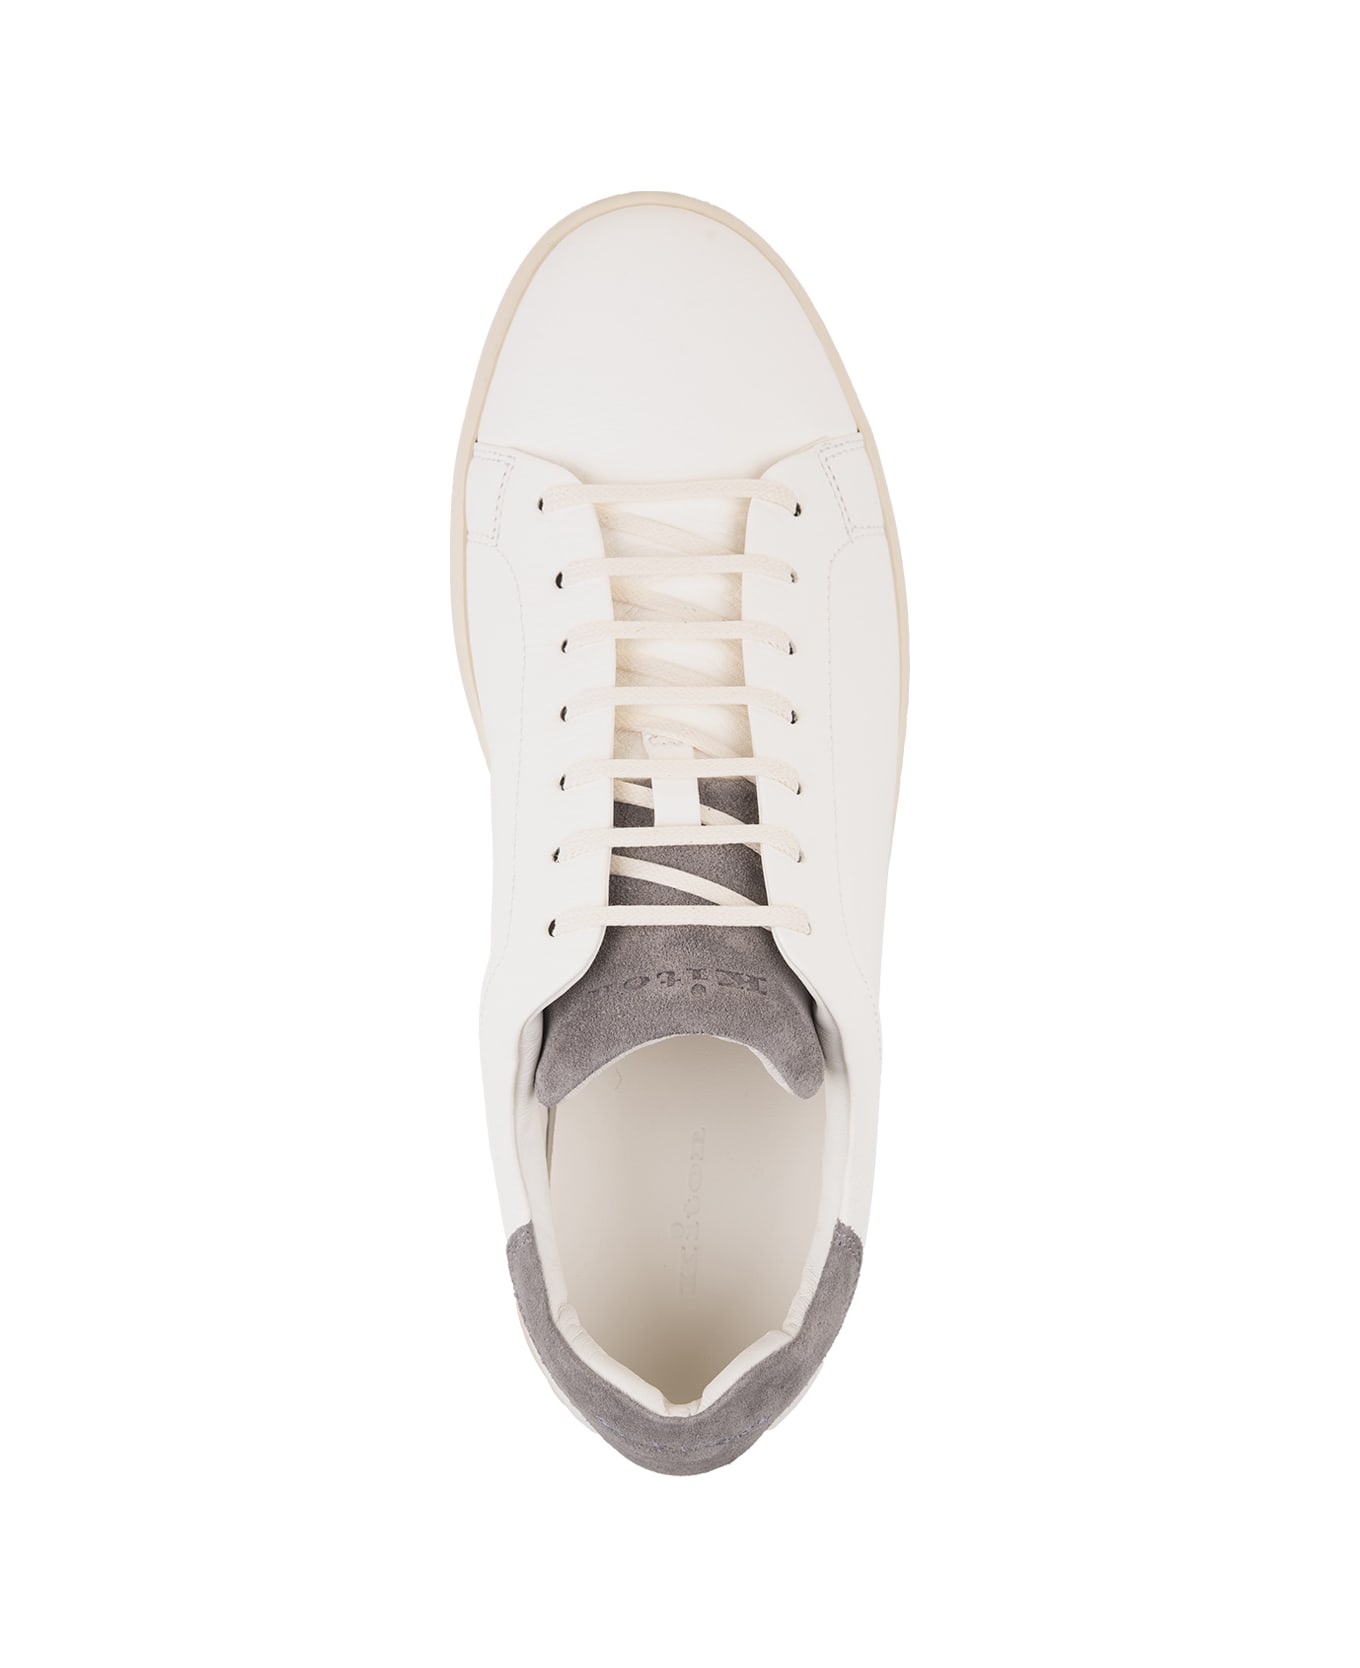 Kiton White Leather Sneakers With Taupe Details - Grey